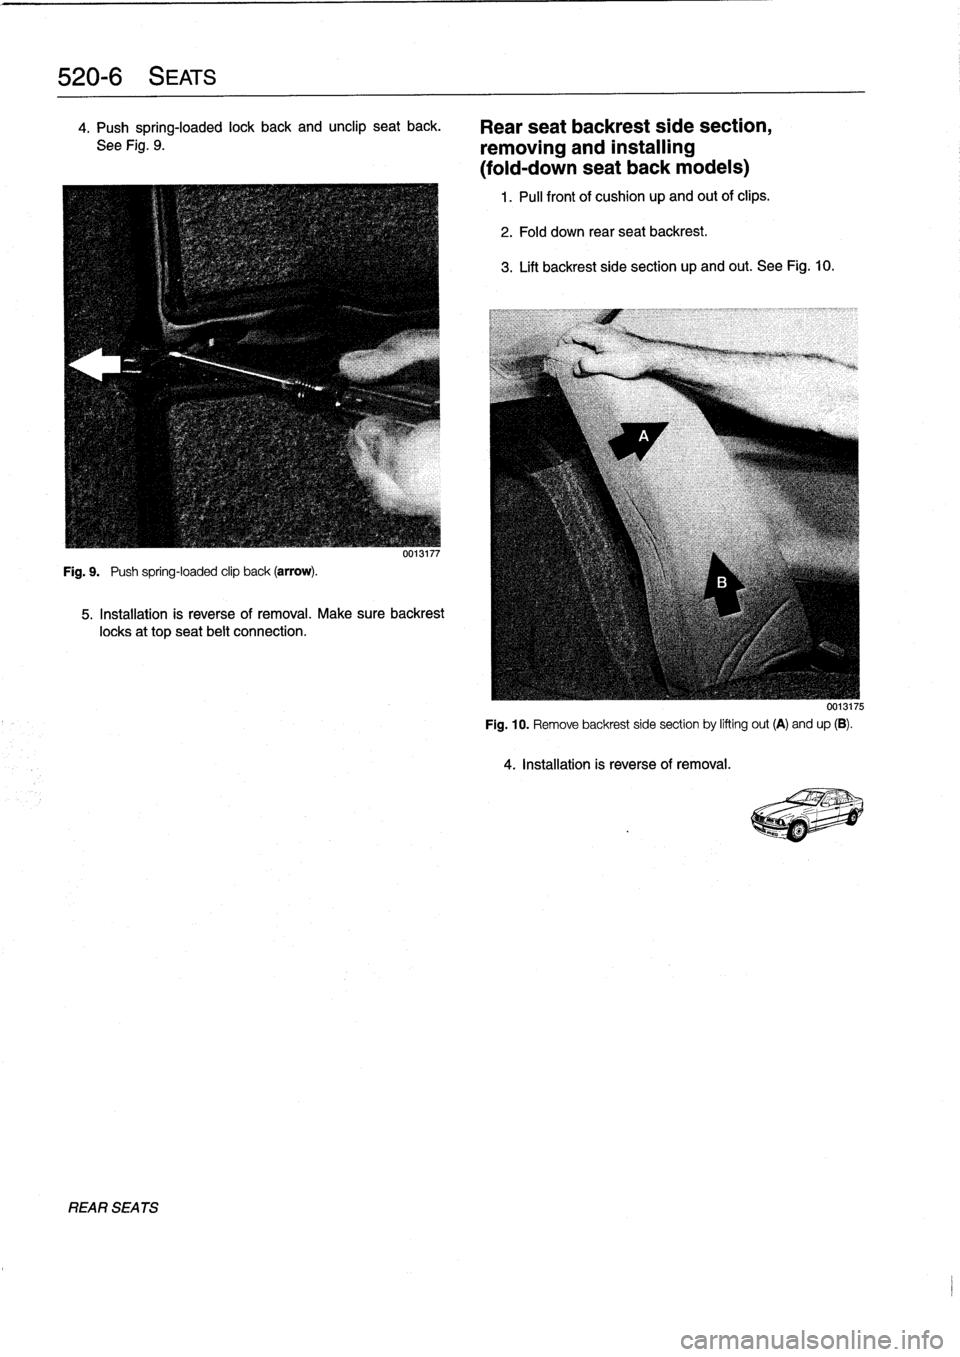 BMW 323i 1997 E36 Workshop Manual 
520-
6
SEATS

4
.
Push
spring-loaded
lock
back
and
unclip
seat
back
.

See
Fig
.
9
.

Fig
.
9
.

	

Push
spring-loaded
clip
back
(arrow)
.

UU13117

5
.
Installation
is
reverse
of
removal
.
Make
sure